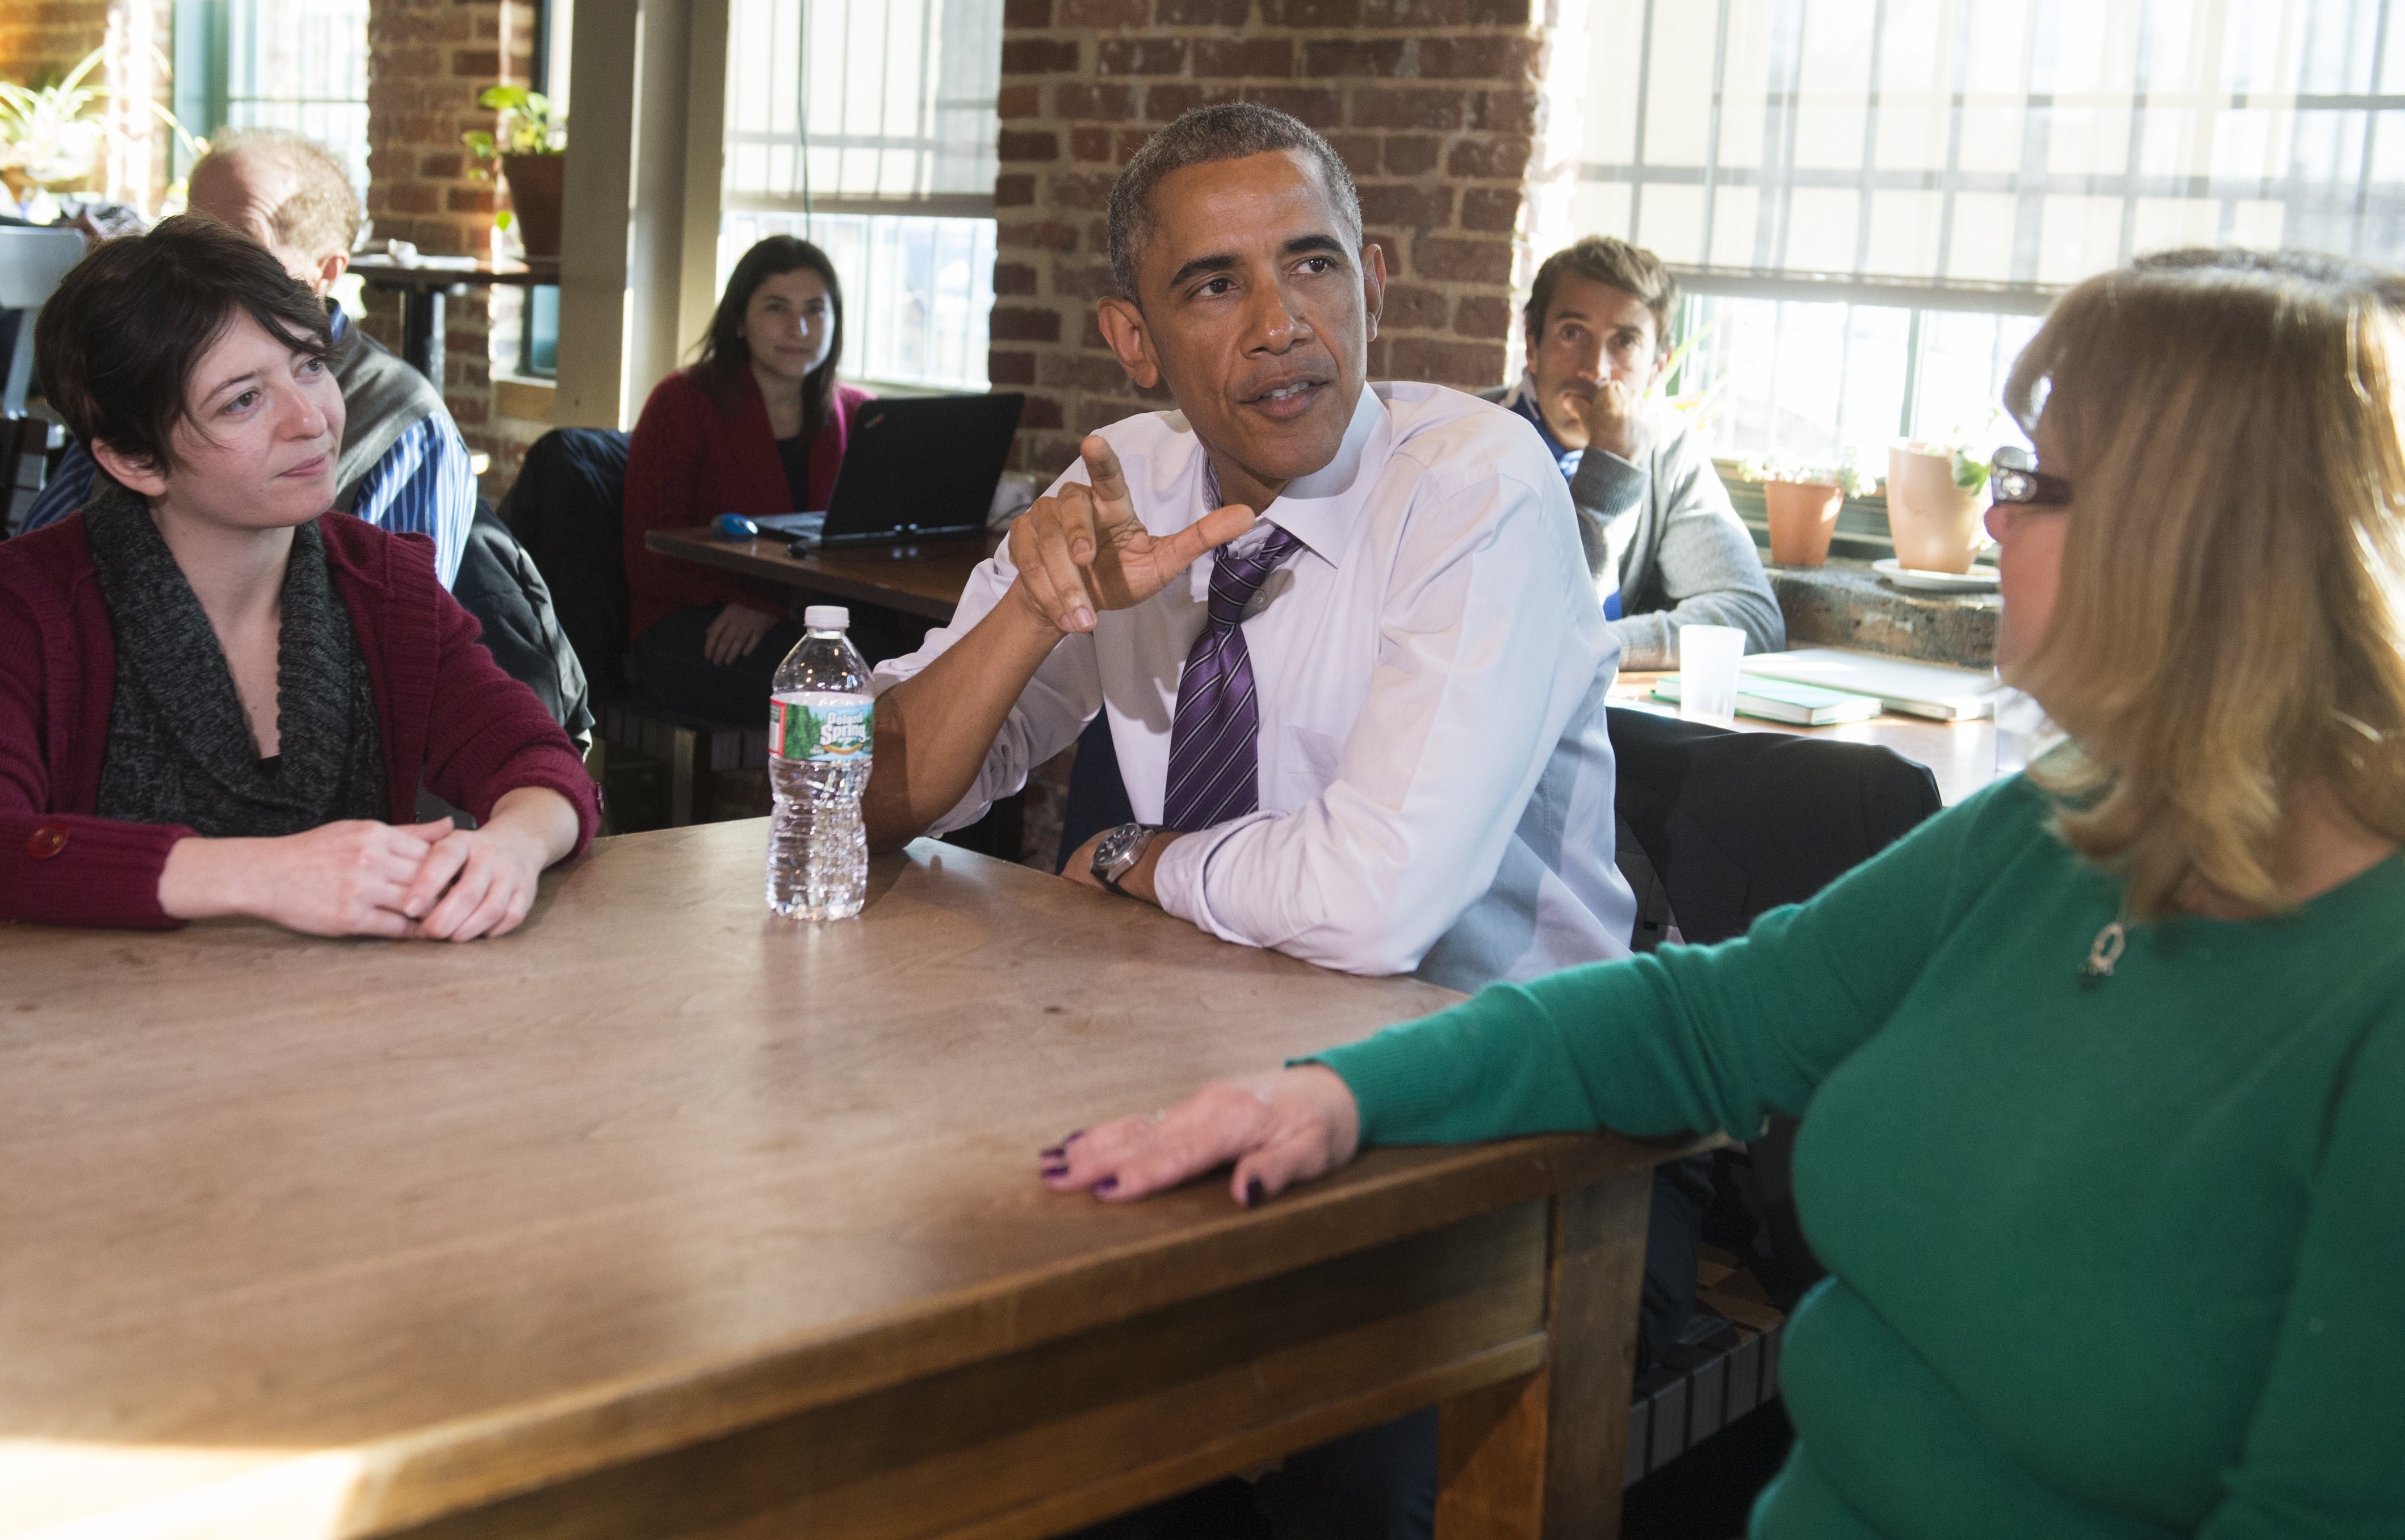 U.S. President Barack Obama speaks about increasing family leave for working Americans with Mary Stein, right, and Amanda Rothschild, left, after having lunch  in Baltimore (Saul Loeb—AFP/Getty Images)